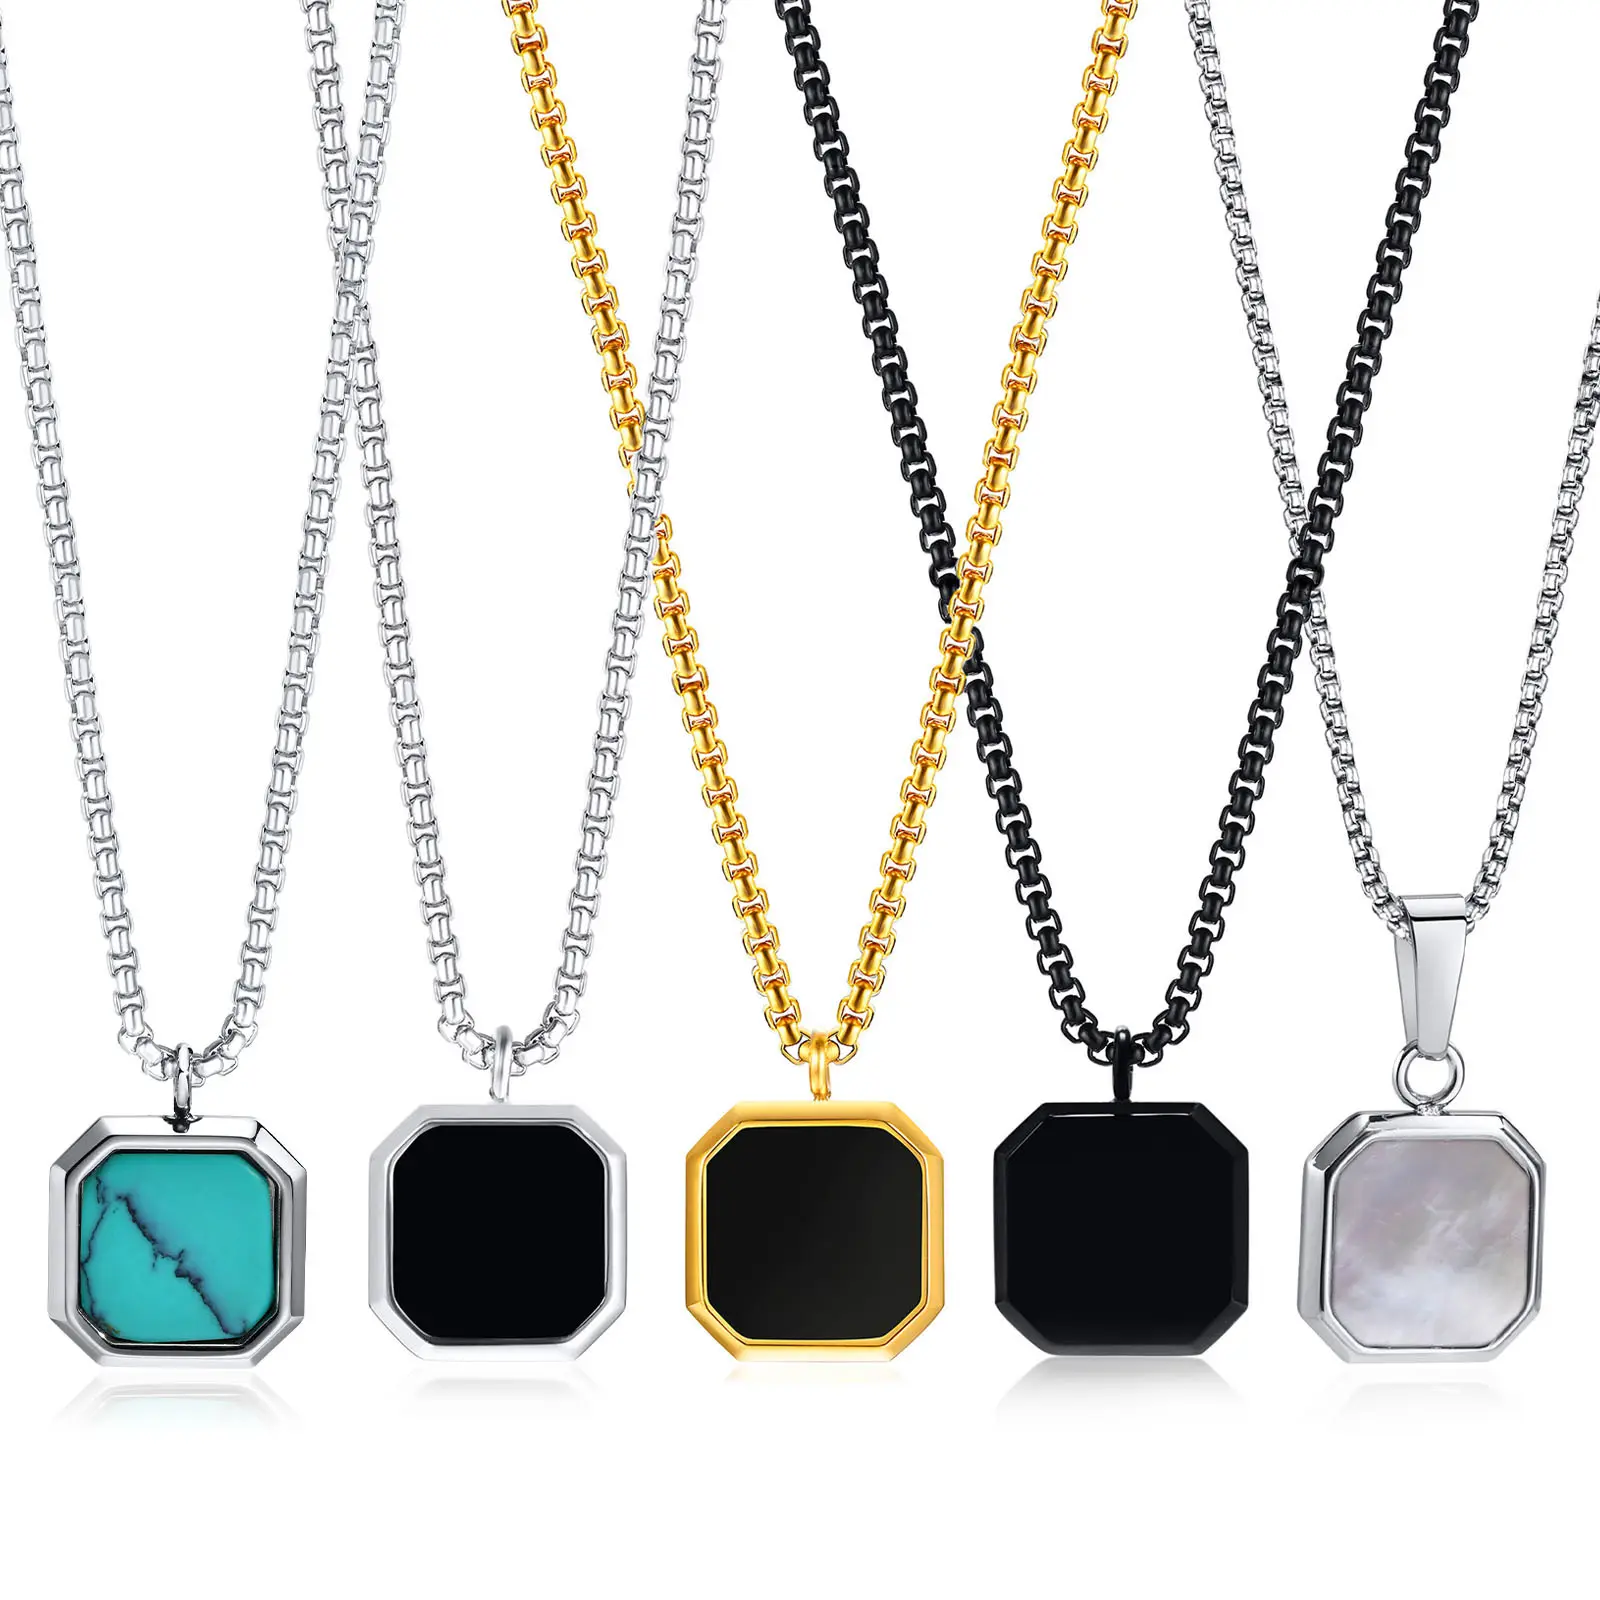 Simple Dainty Men's Jewelry Stainless Steel Enamel Black Onyx Natural Stone Square White Shell Pendant Gold Chain Necklace Men